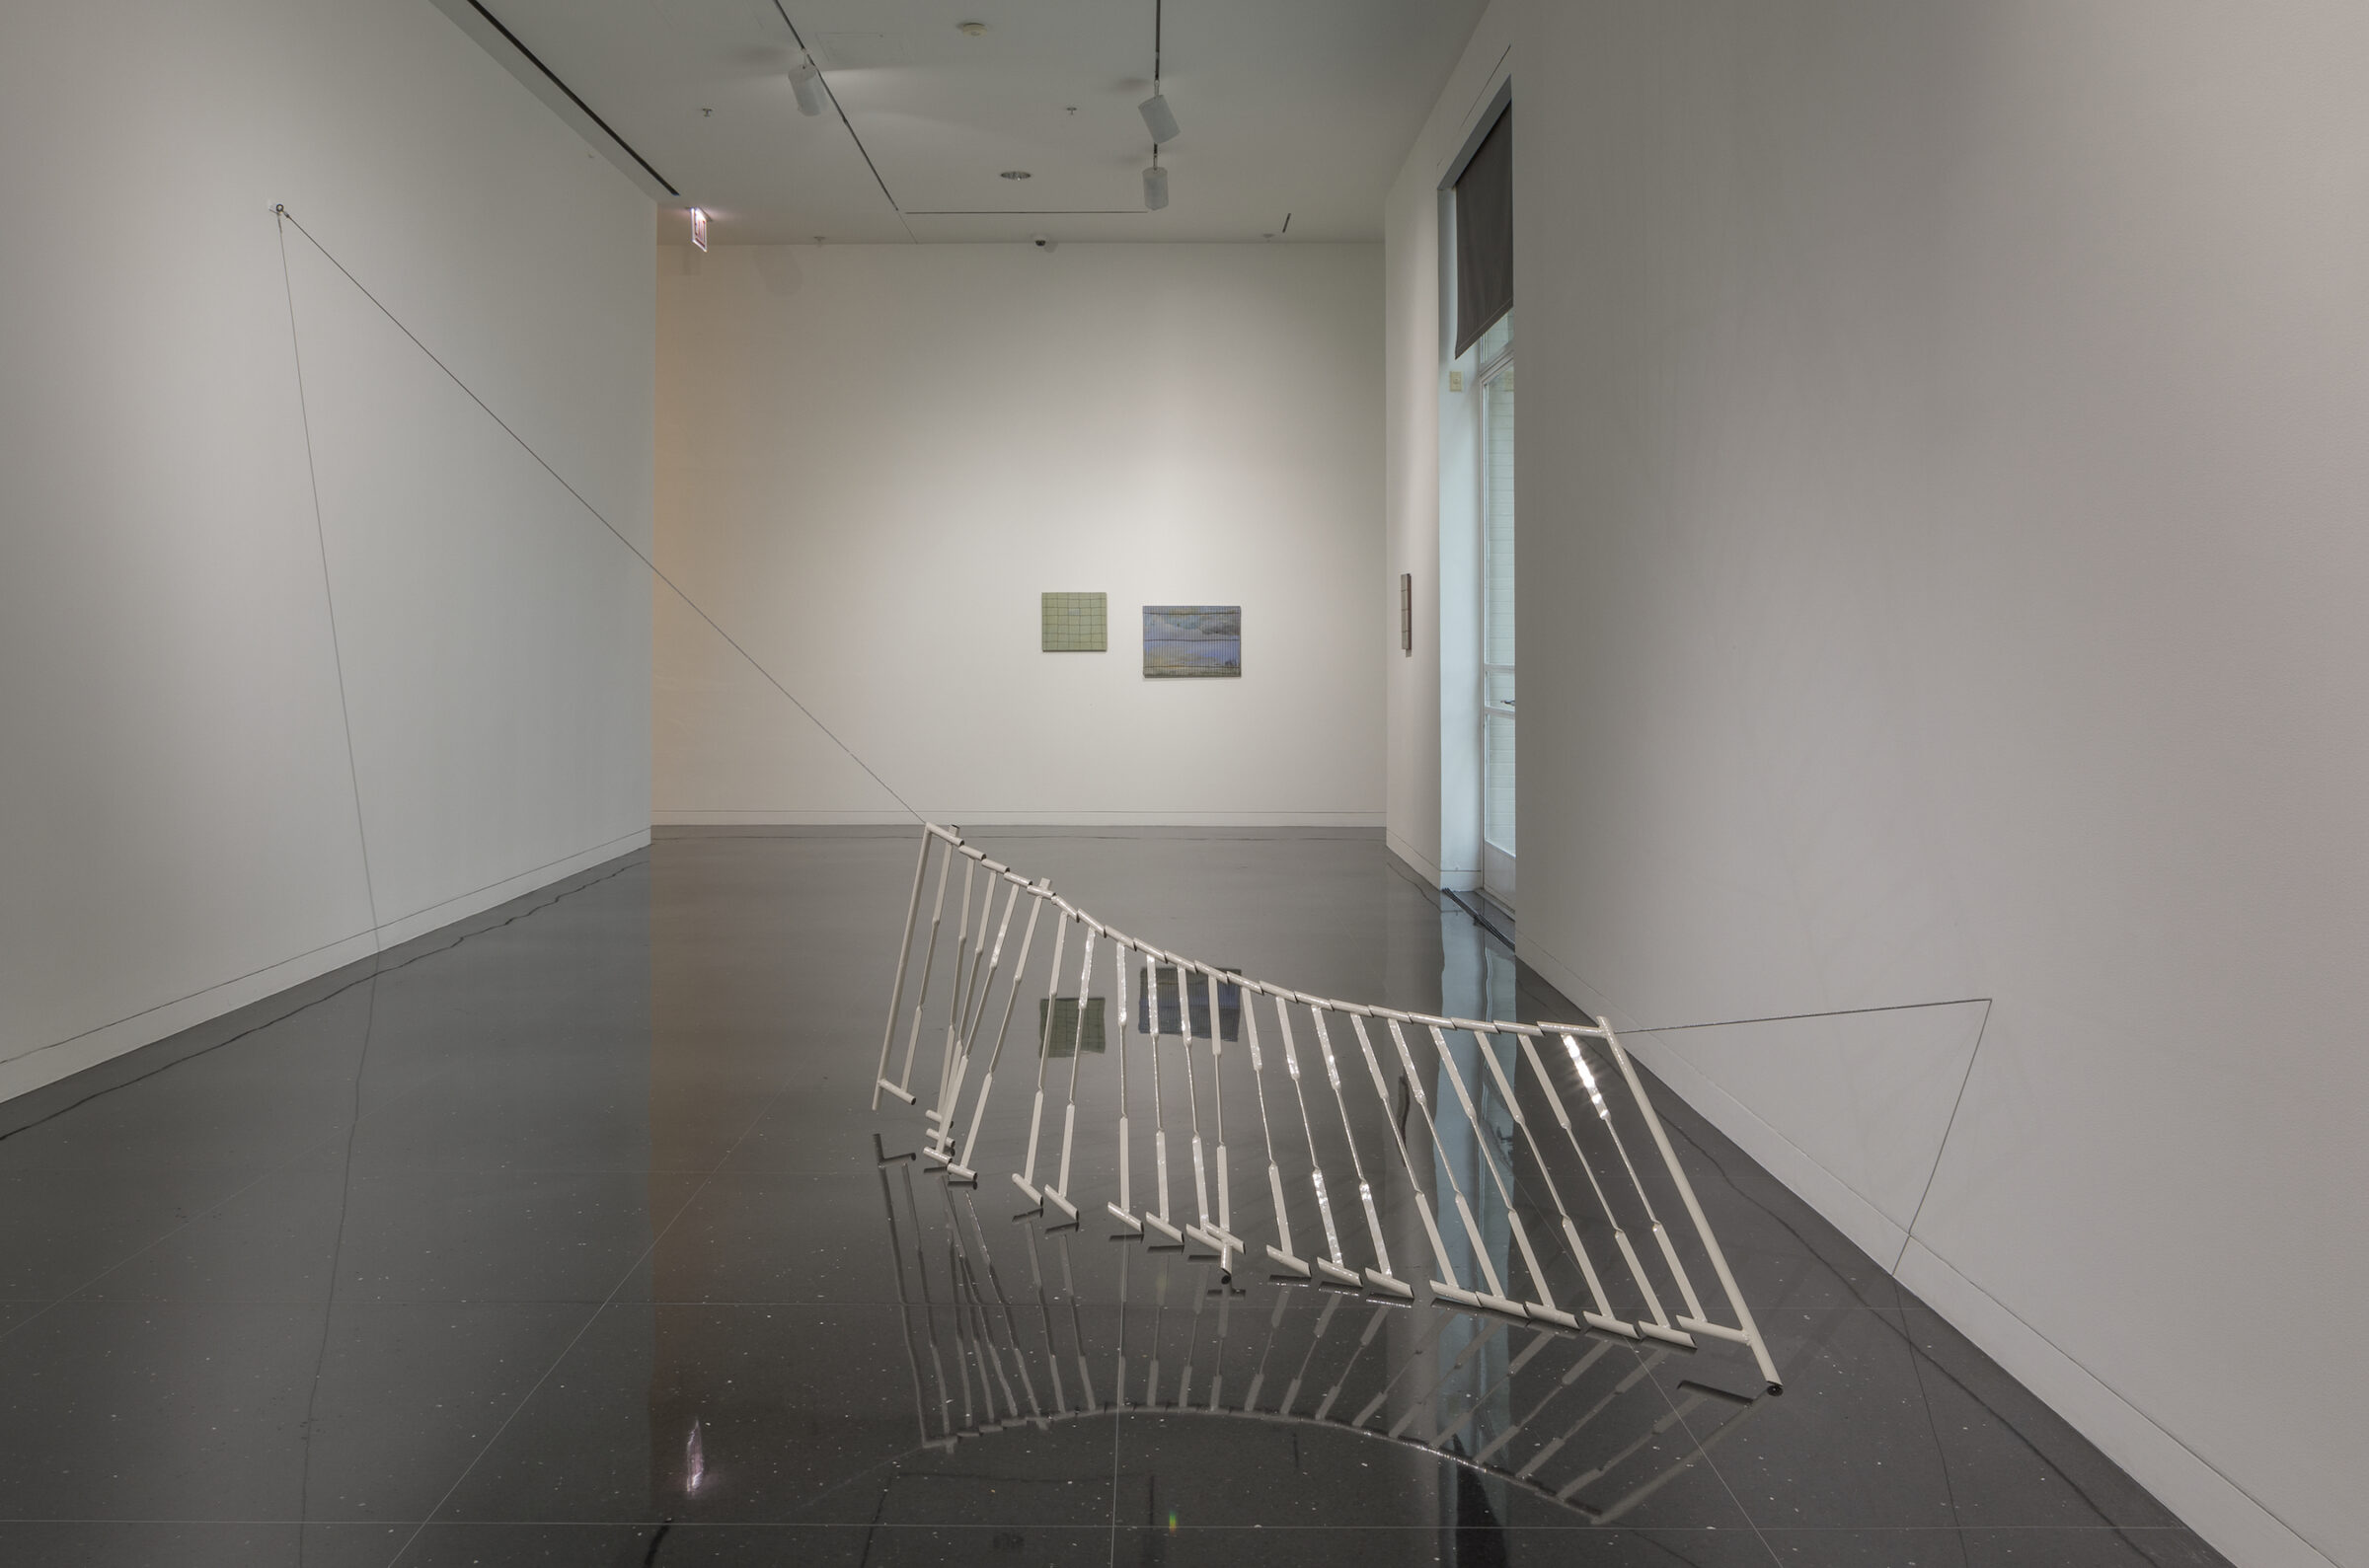 Installation view of a series of white stair rails suspended by a thin wire hanging between two gallery walls.